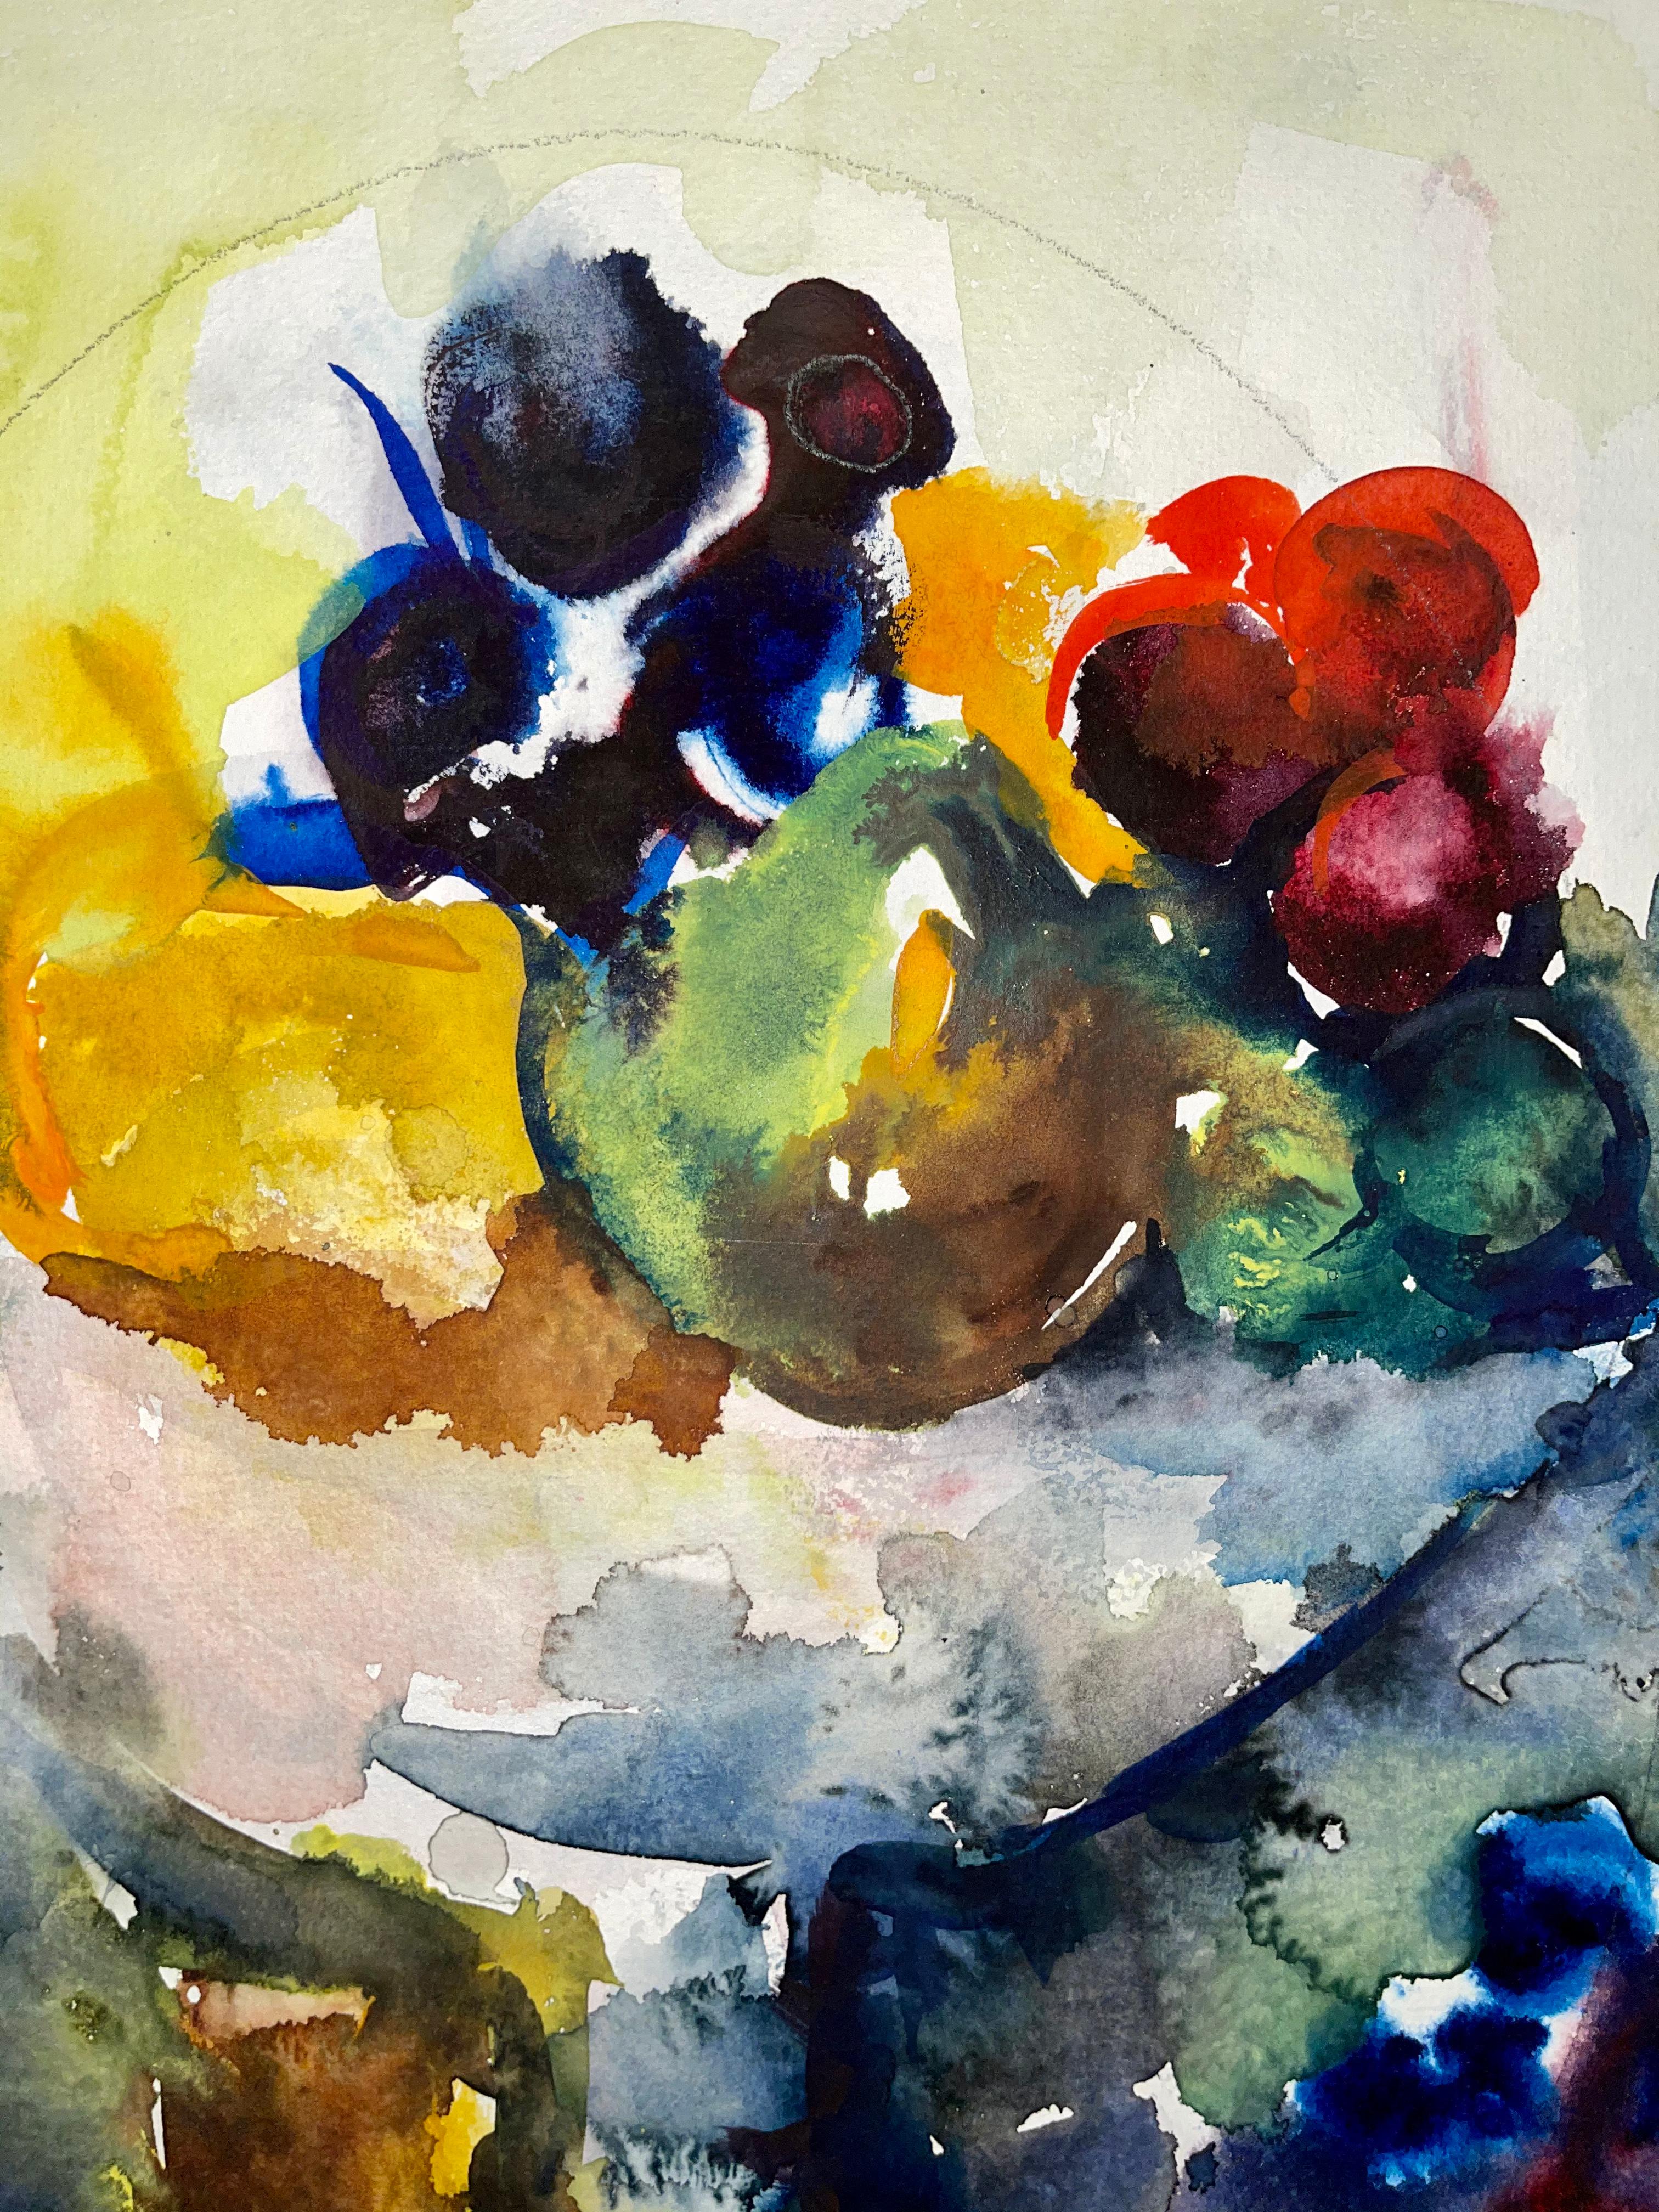 Artist: Ian Hornak (1944-2002)
Title: Untitled (Abstract Still Life with Flowers and Fruit)
Year: 1963
Medium: Watercolor on heavy archival paper
Size: 29.5 x 21 inches
Condition: Good
Provenance: Estate of Ian Hornak, East Hampton, NY
Notes: A rare